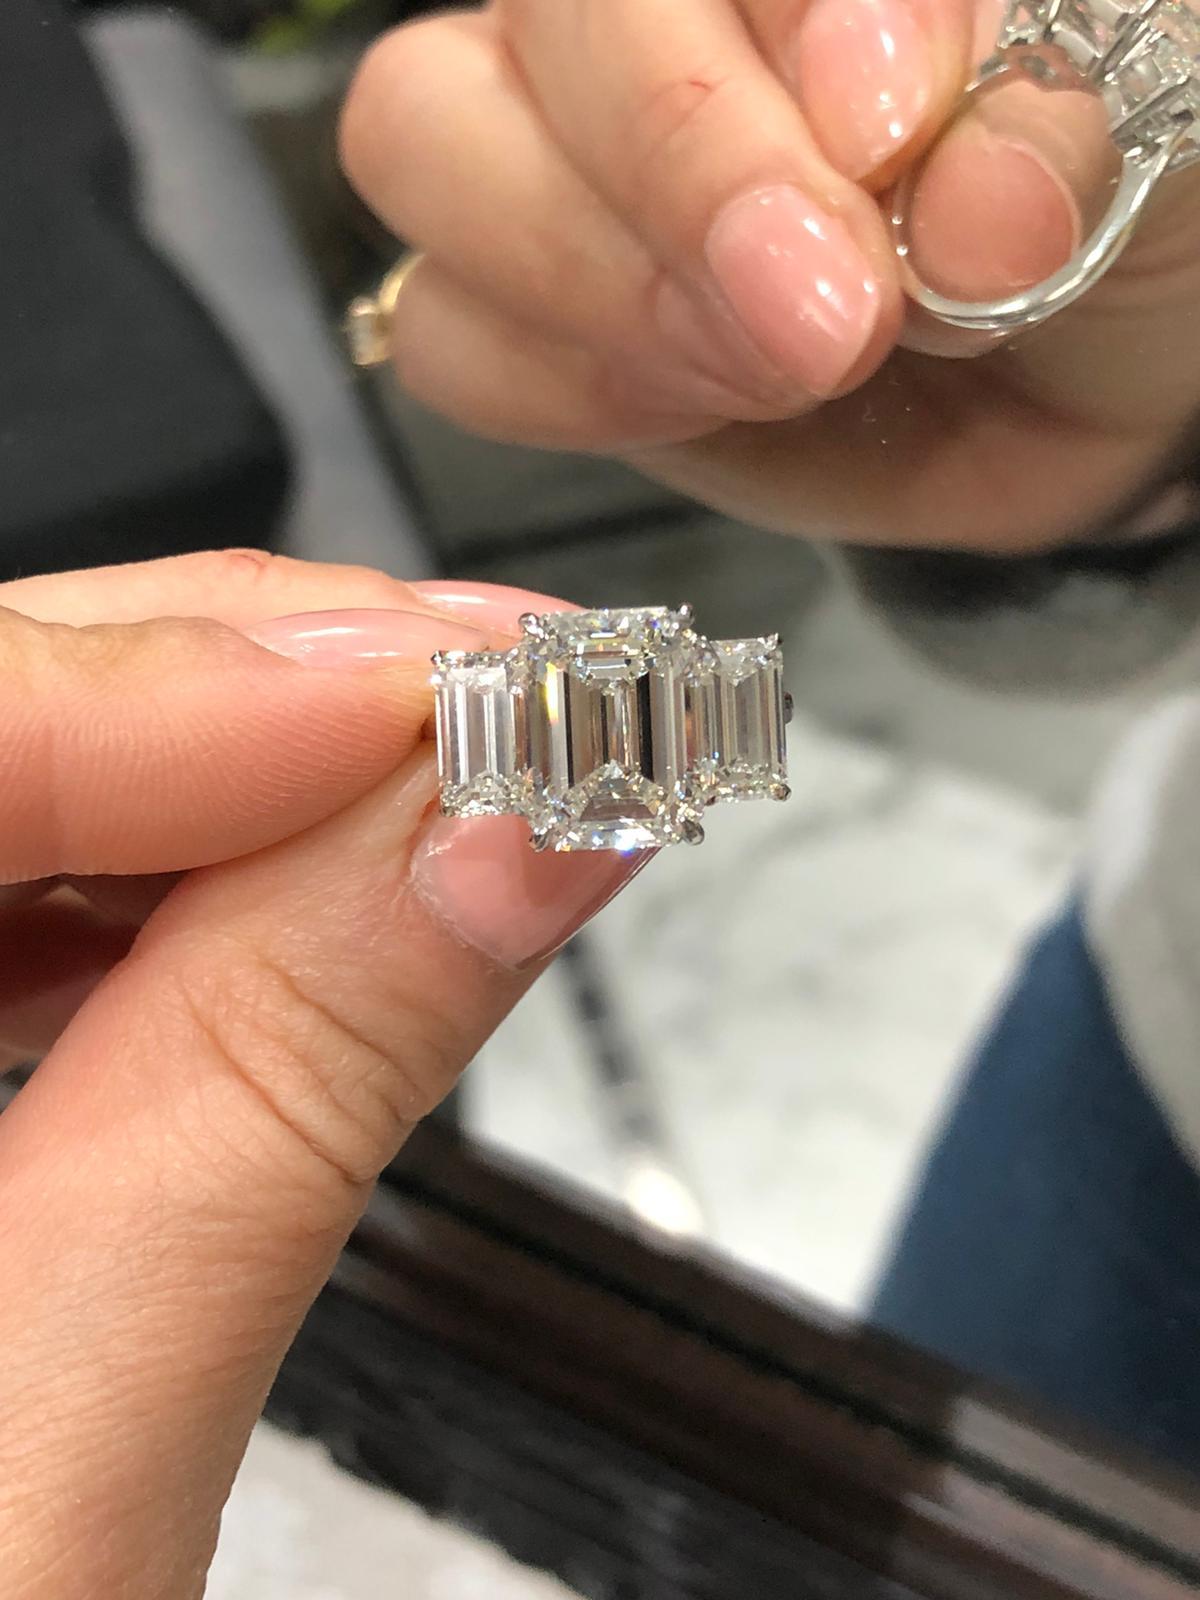 An extraordinary GIA certified three stone 7 carat emerald cut diamond ring.
The main stone is a 5 carat I color si1 Clarity 100% Eye clean stone
